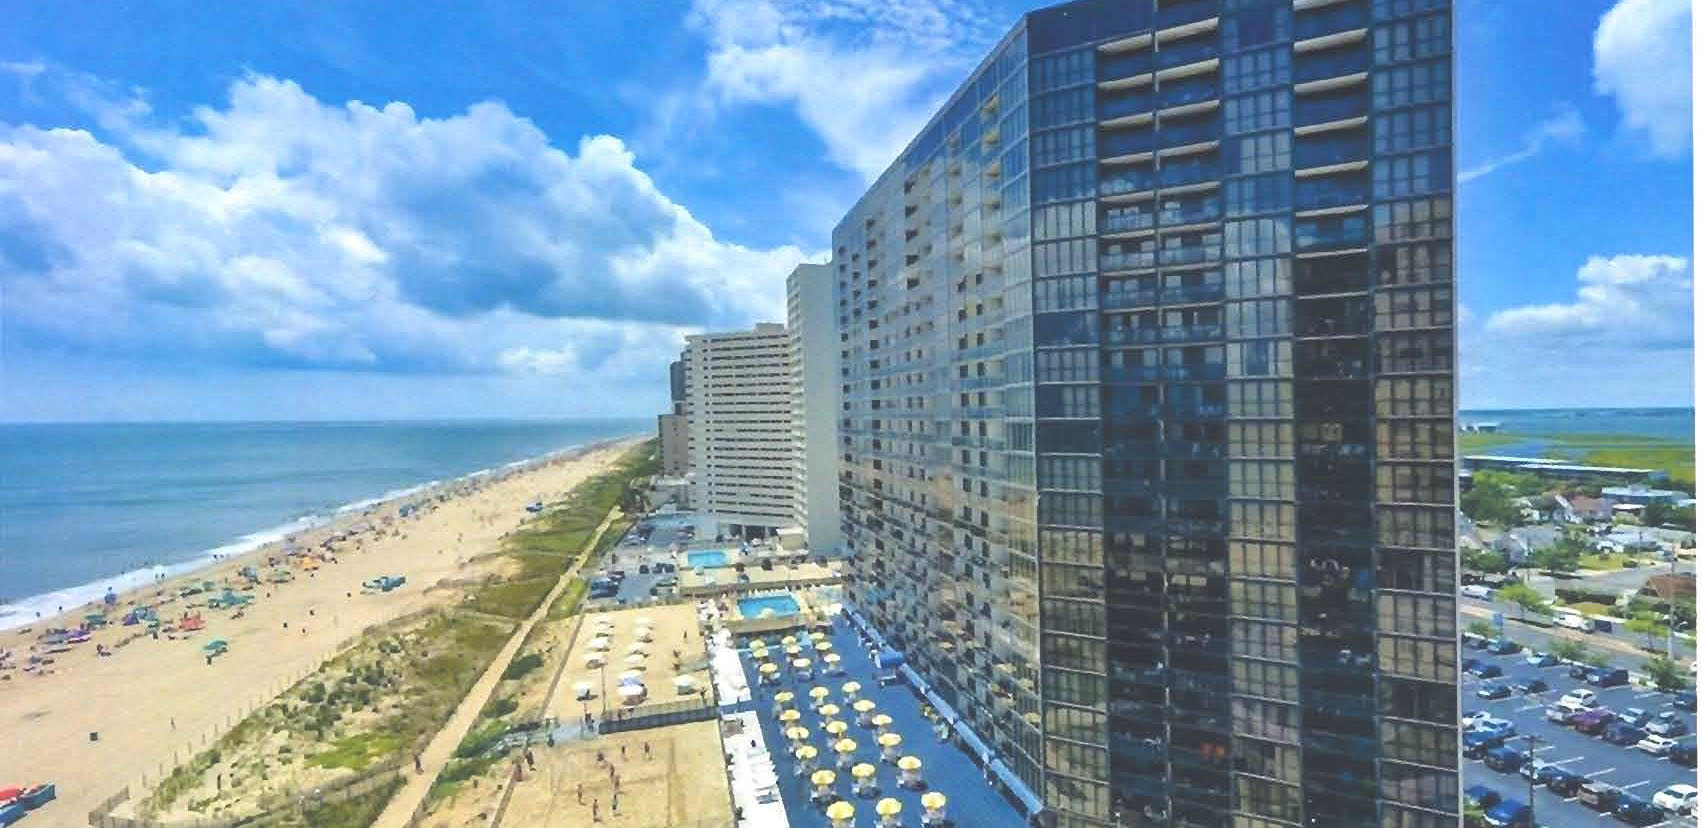 Ocean City Condos has beachfront condos shown here at the Carousel, Sea Watch, Golden Sands.  Not visible  in the 
photo are our Townhouses near the Boardwalk.
Weekly and weekend rentals available for couples, families, and groups.  